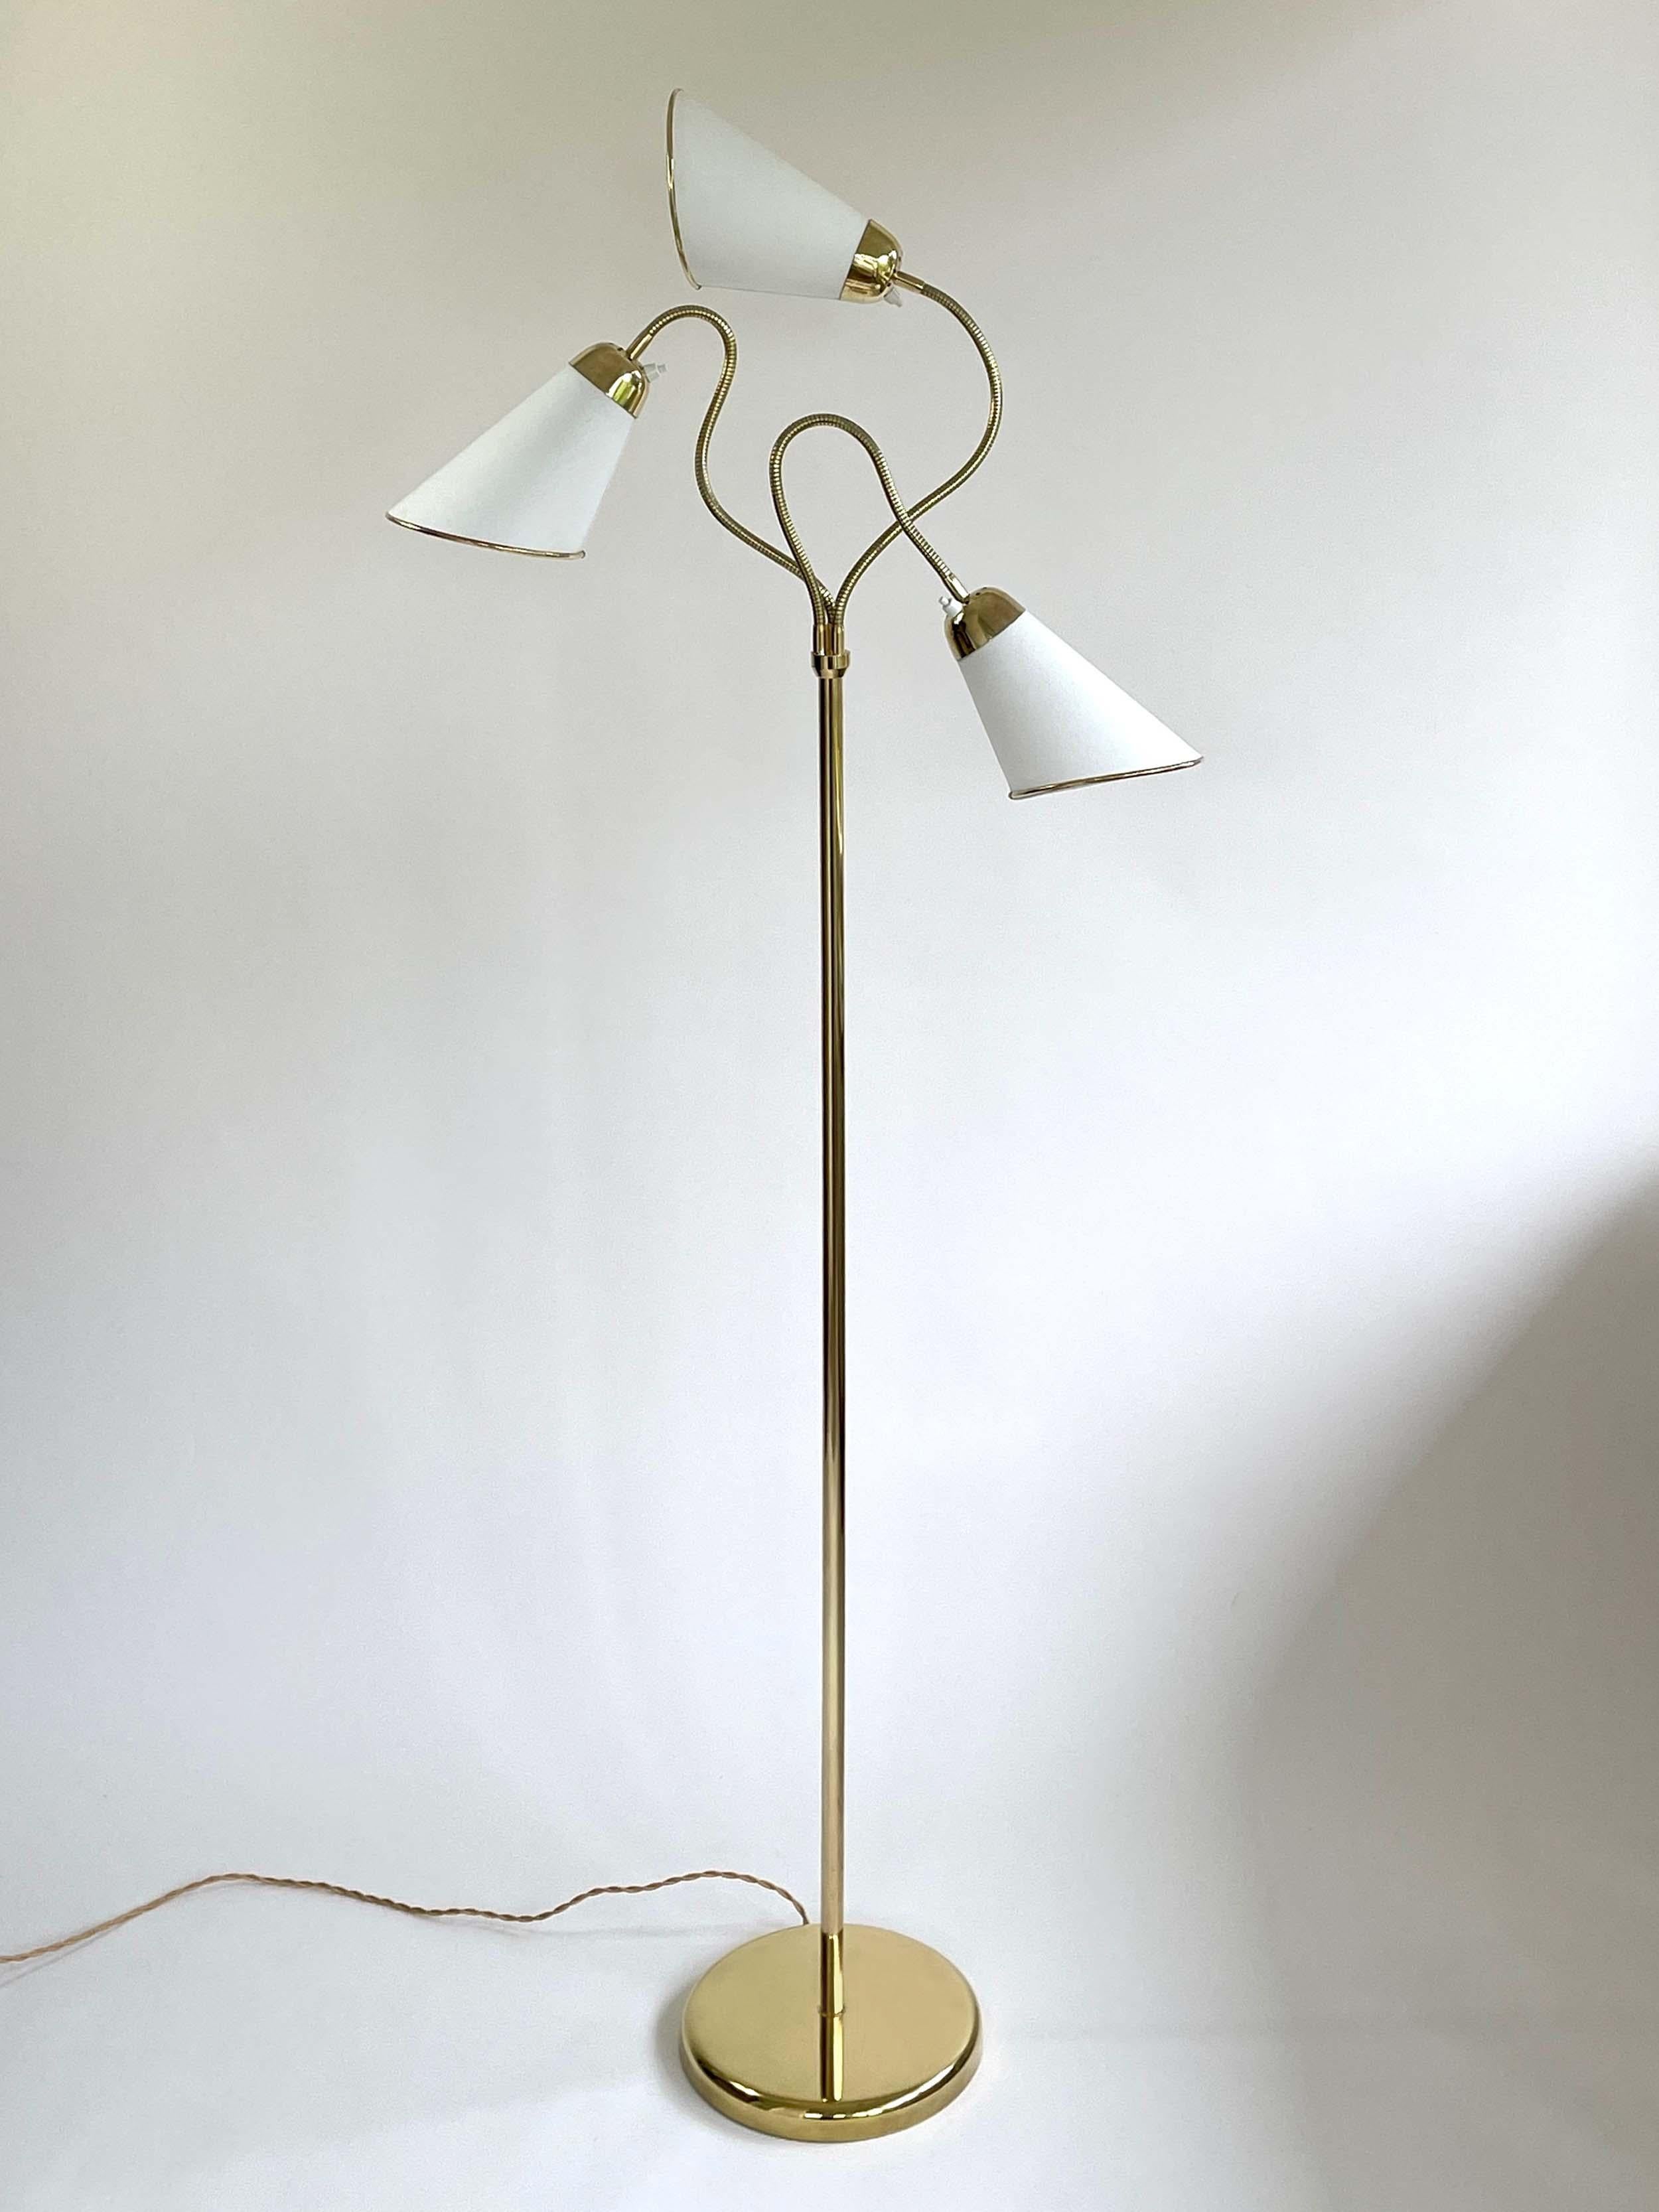 This unusual midcentury brass gooseneck floor lamp was designed and manufactured in Sweden in the 1950s.

The lamp features a round brass base and three adjustable gooseneck lamp arms with off white cotton lampshades. The fabric shades have been